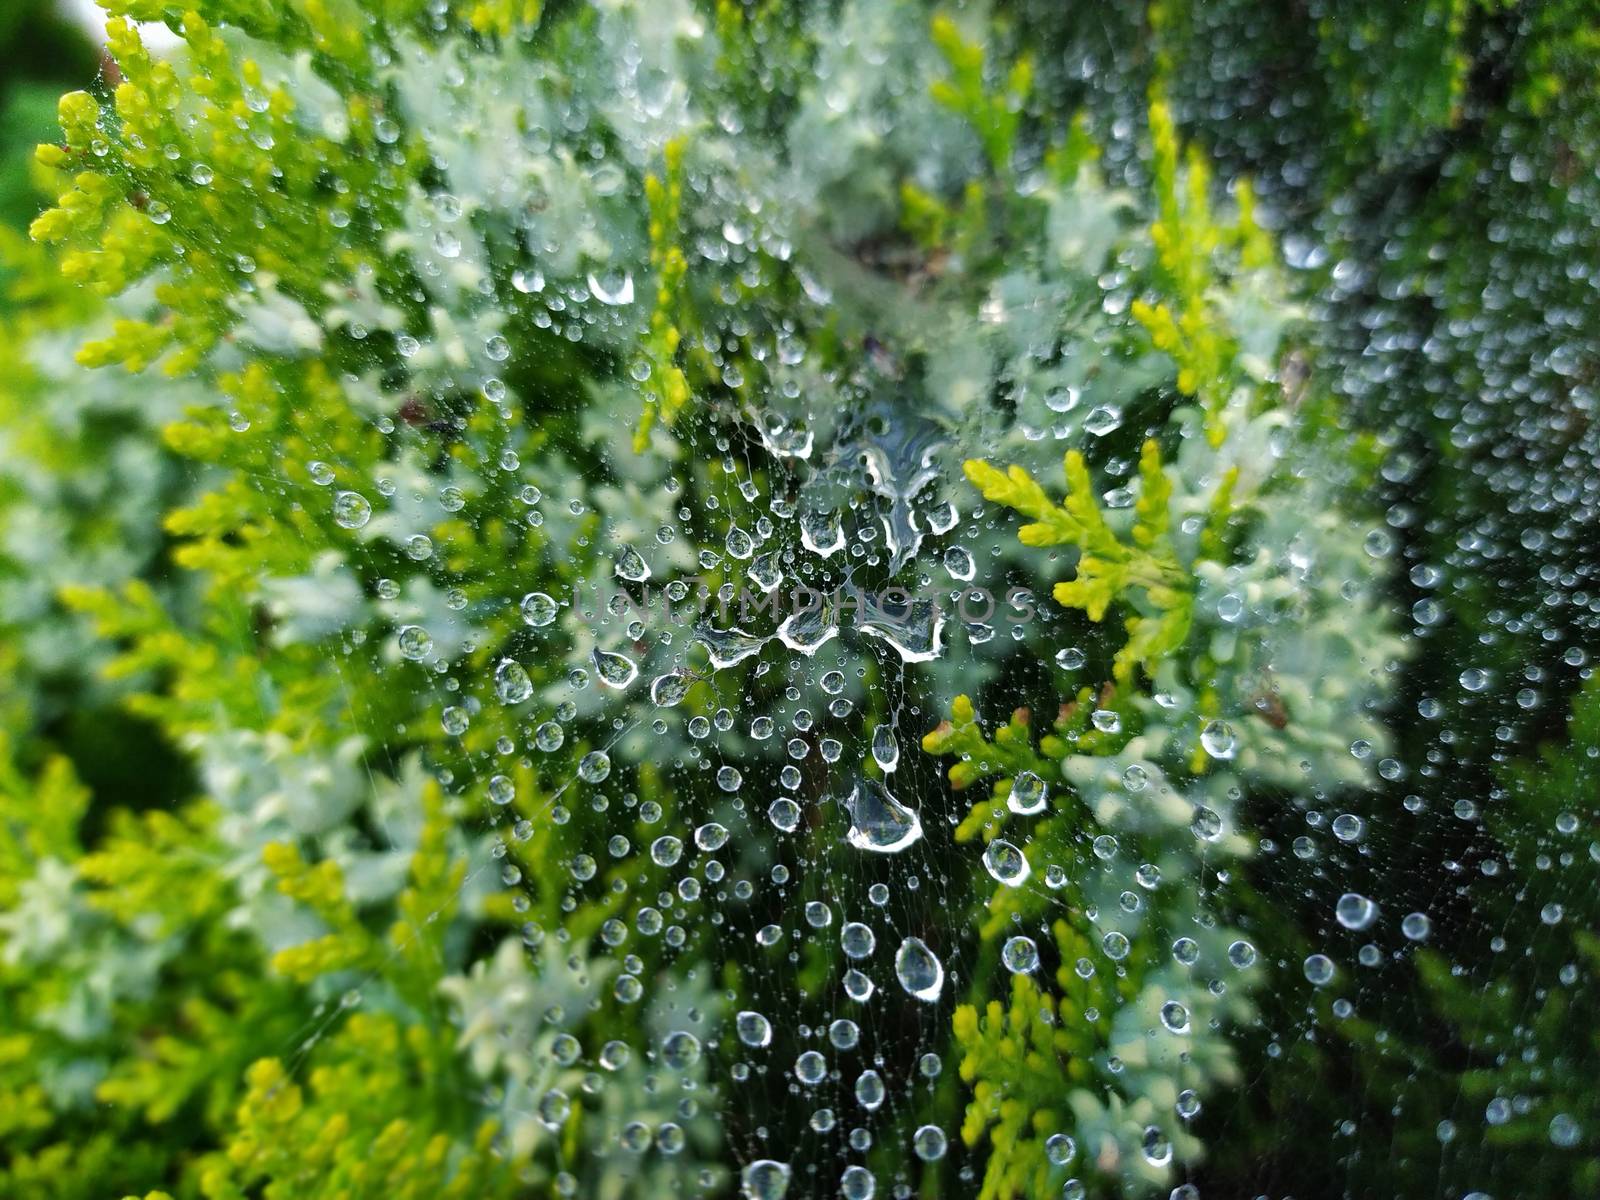 droplets of rain on the spider web